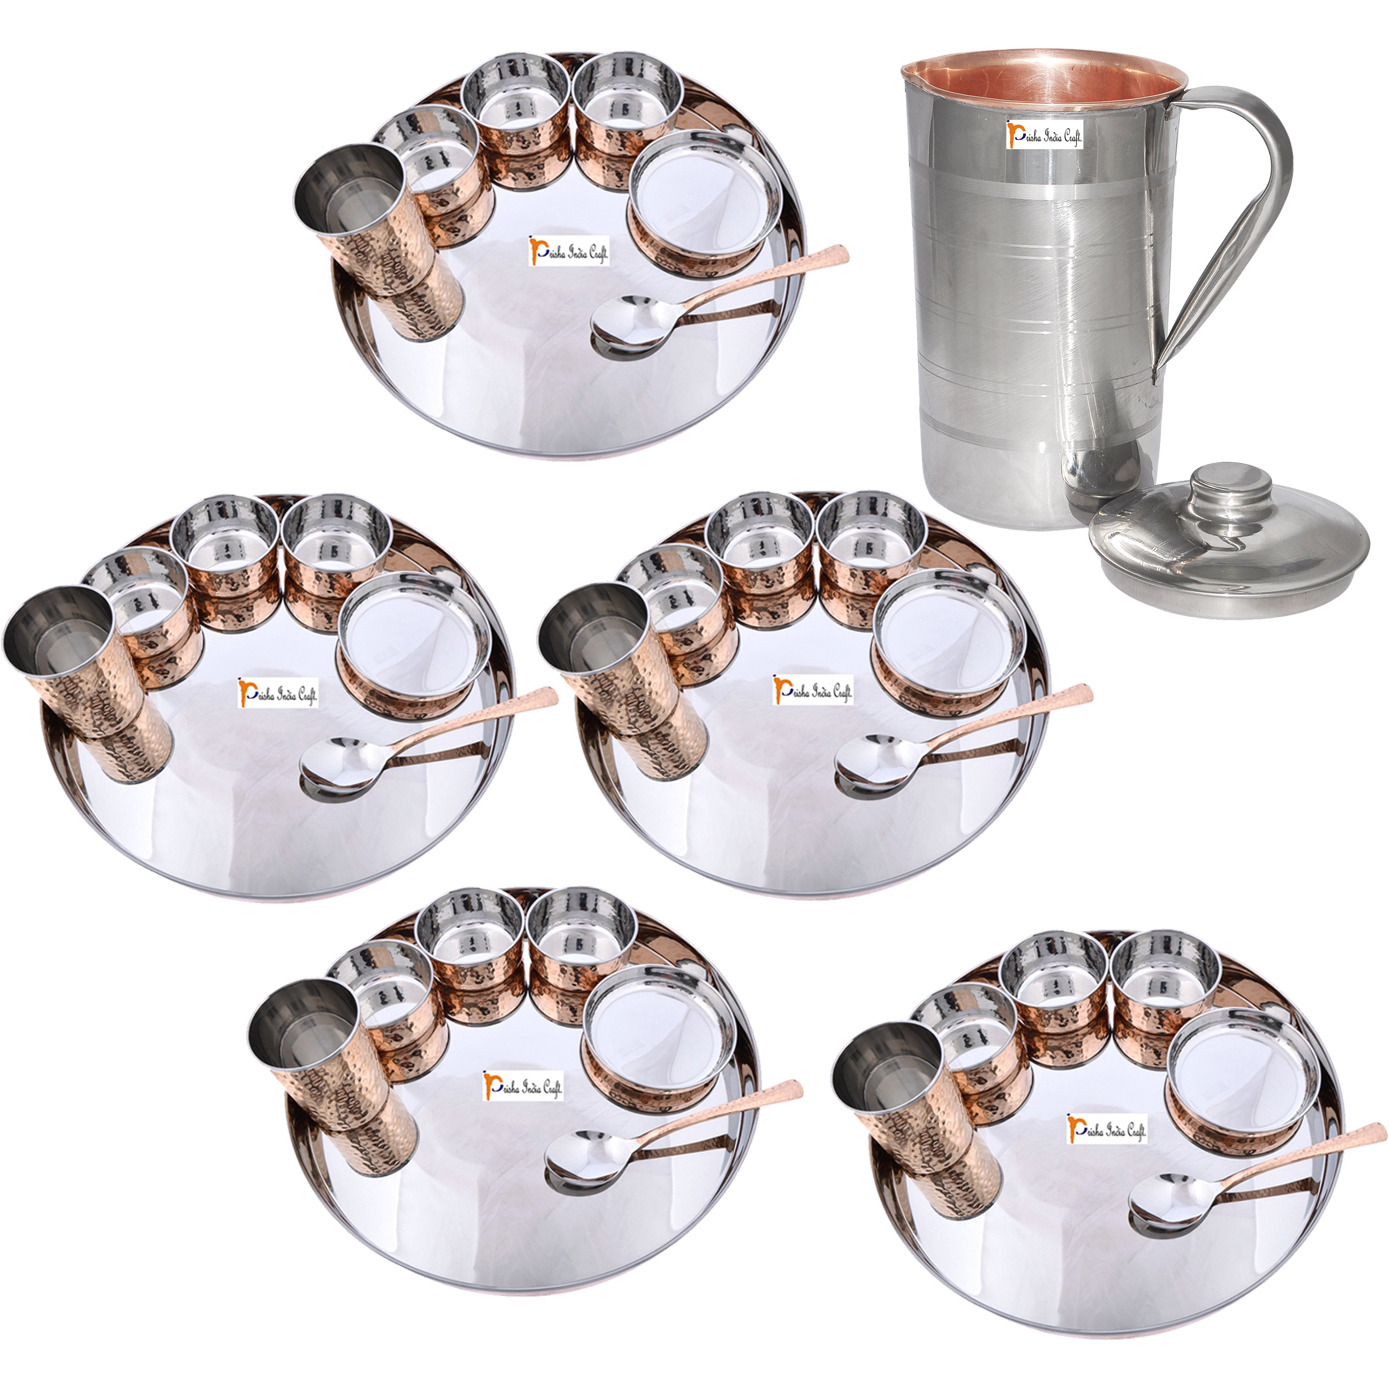 Prisha India Craft B. Set of 5 Dinnerware Traditional Stainless Steel Copper Dinner Set of Thali Plate, Bowls, Glass and Spoon, Dia 13  With 1 Luxury Style Pitcher Jug - Christmas Gift